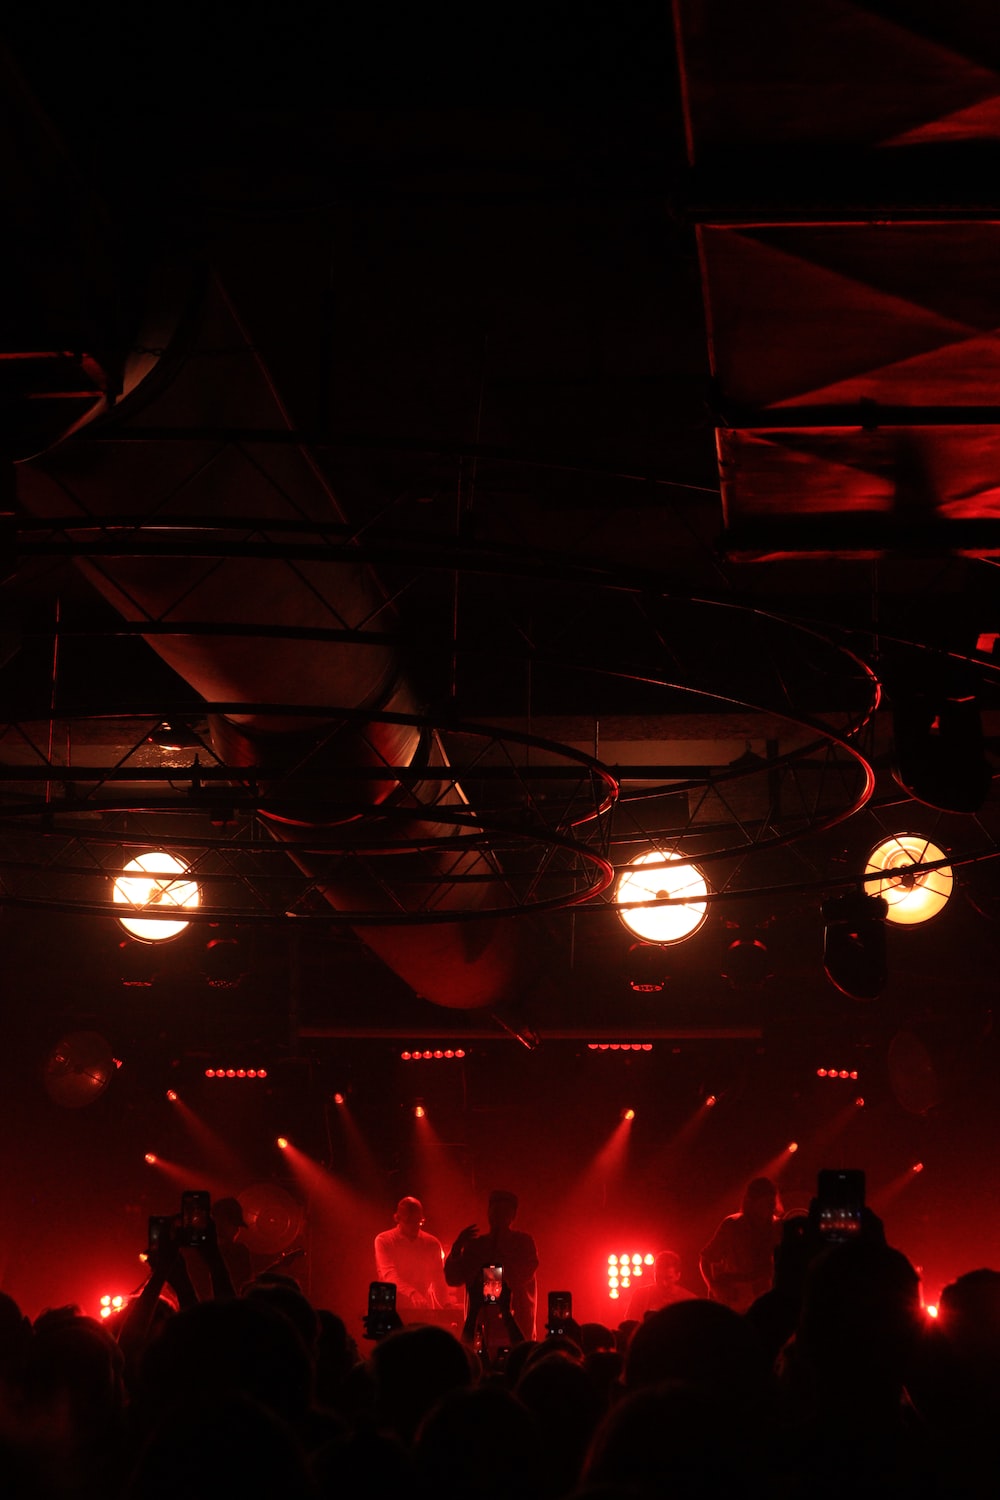 A band performing on stage with red lights and smoke. - Light red